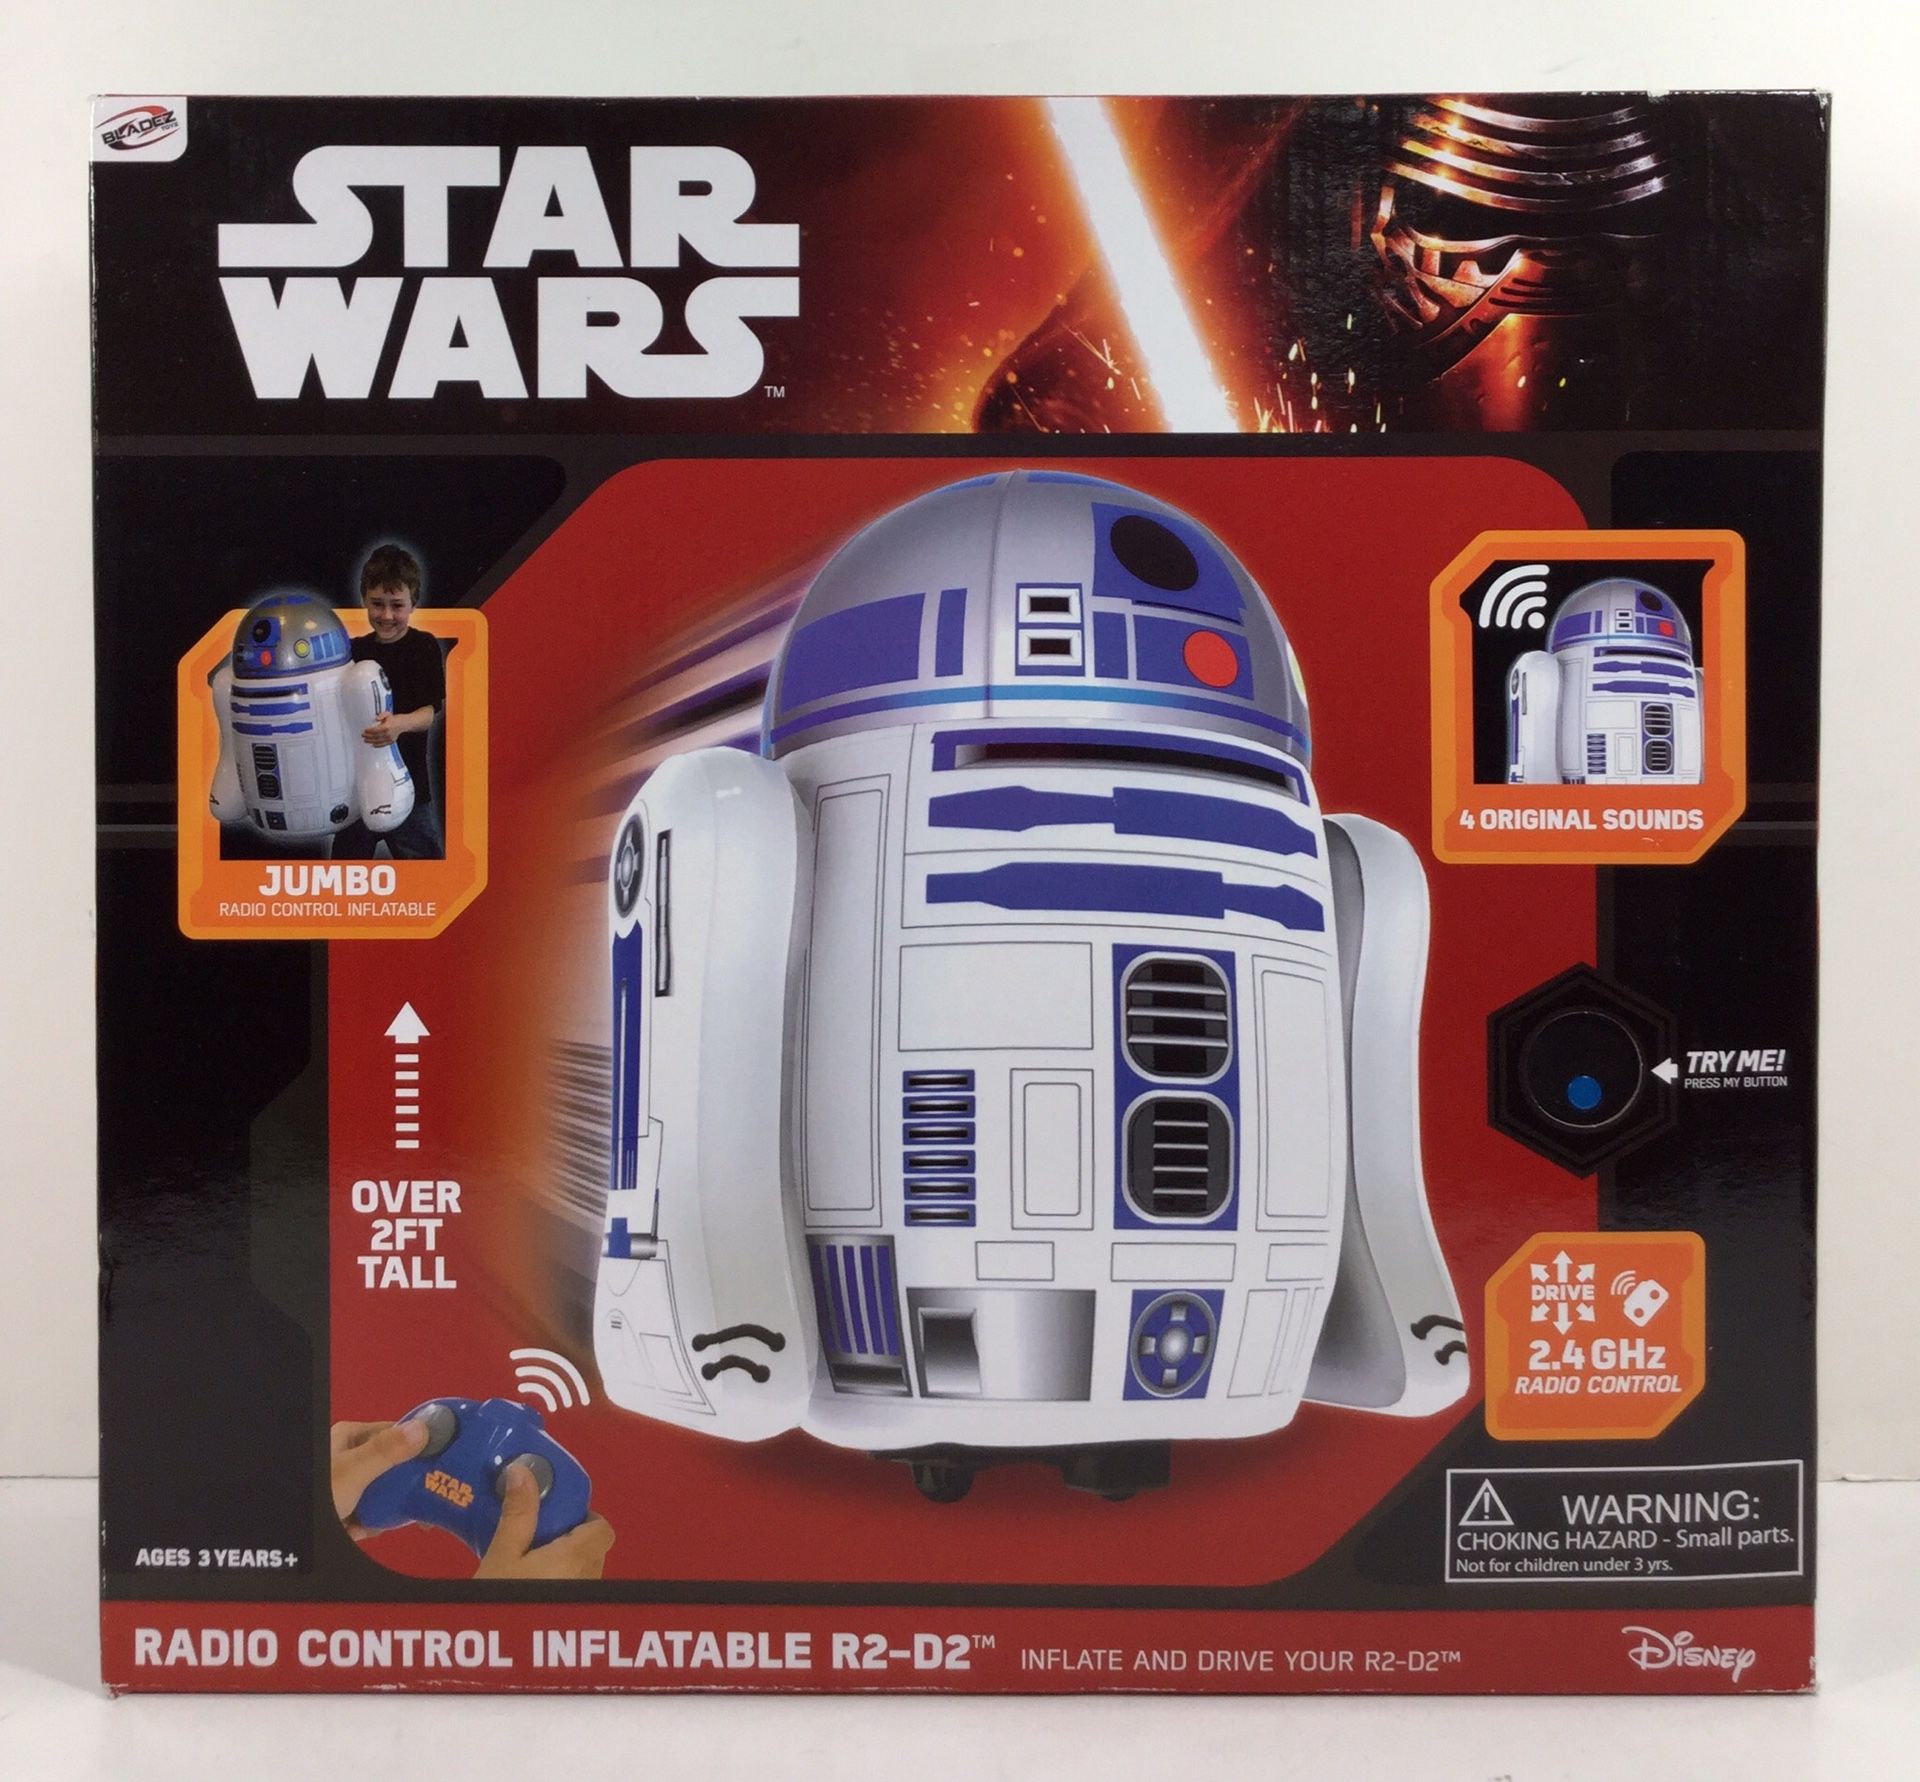 Star Wars Radio Control Inflatable R2-D2 - New!